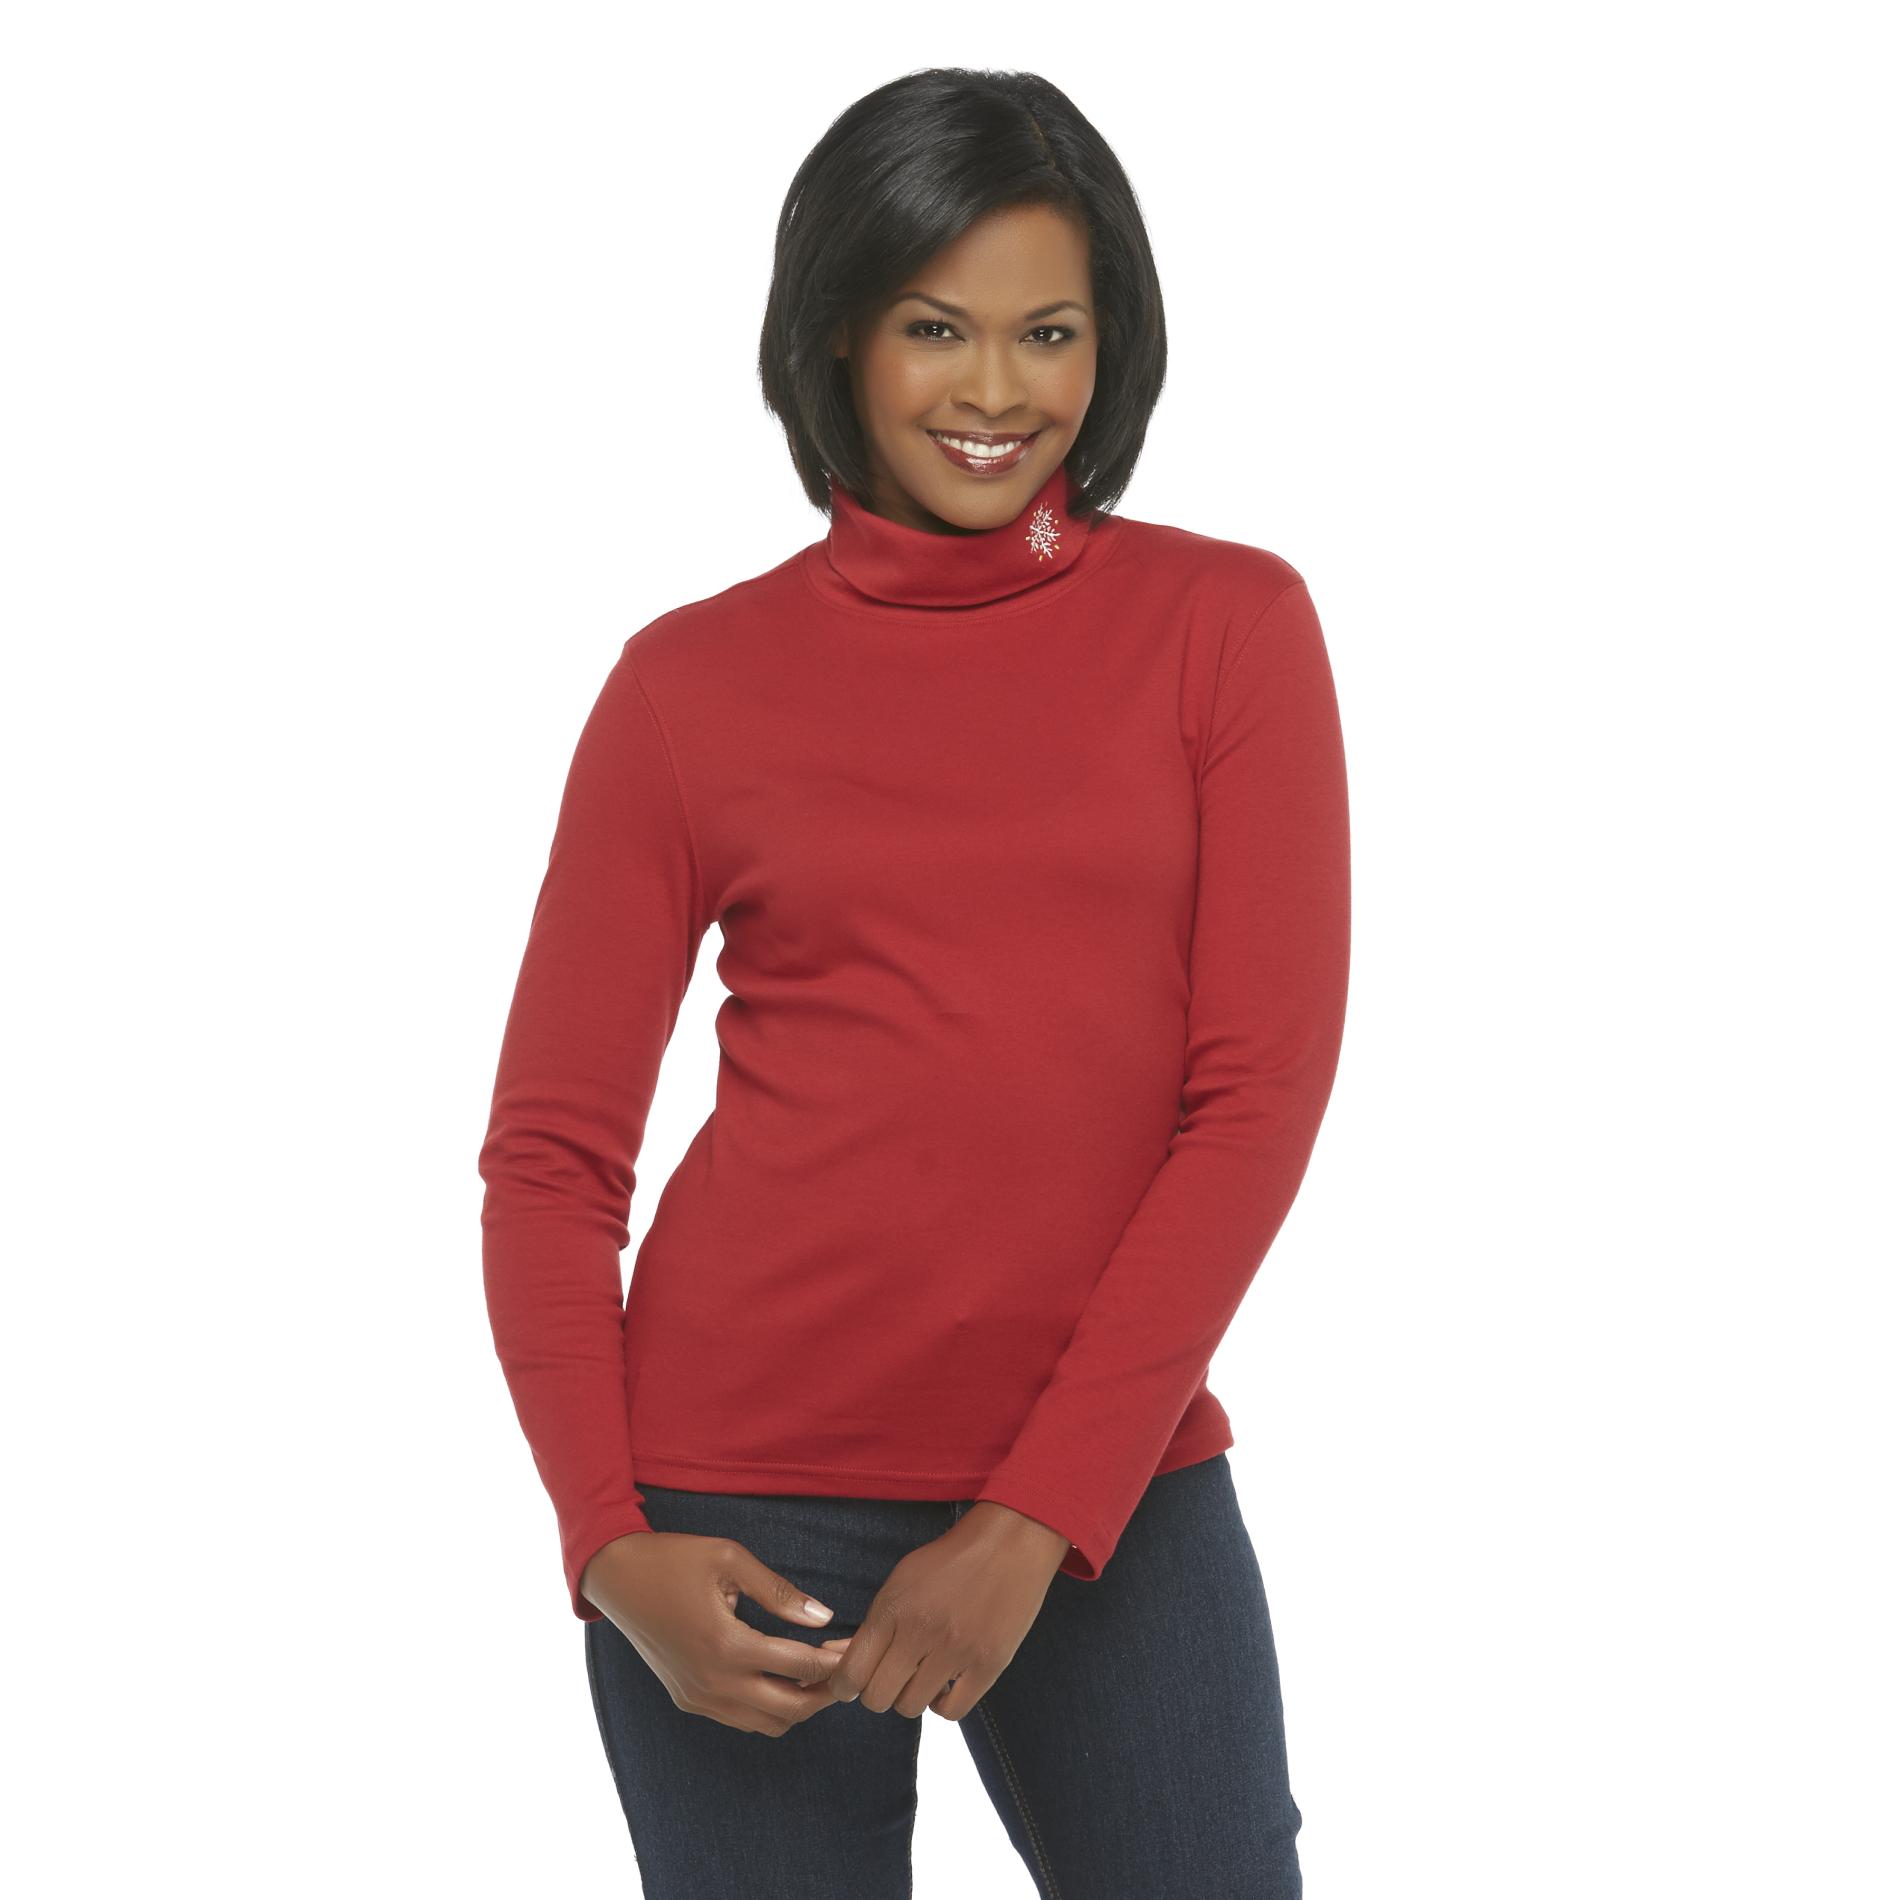 Holiday Editions Women's Christmas Embroidered Turtleneck - Snowflake